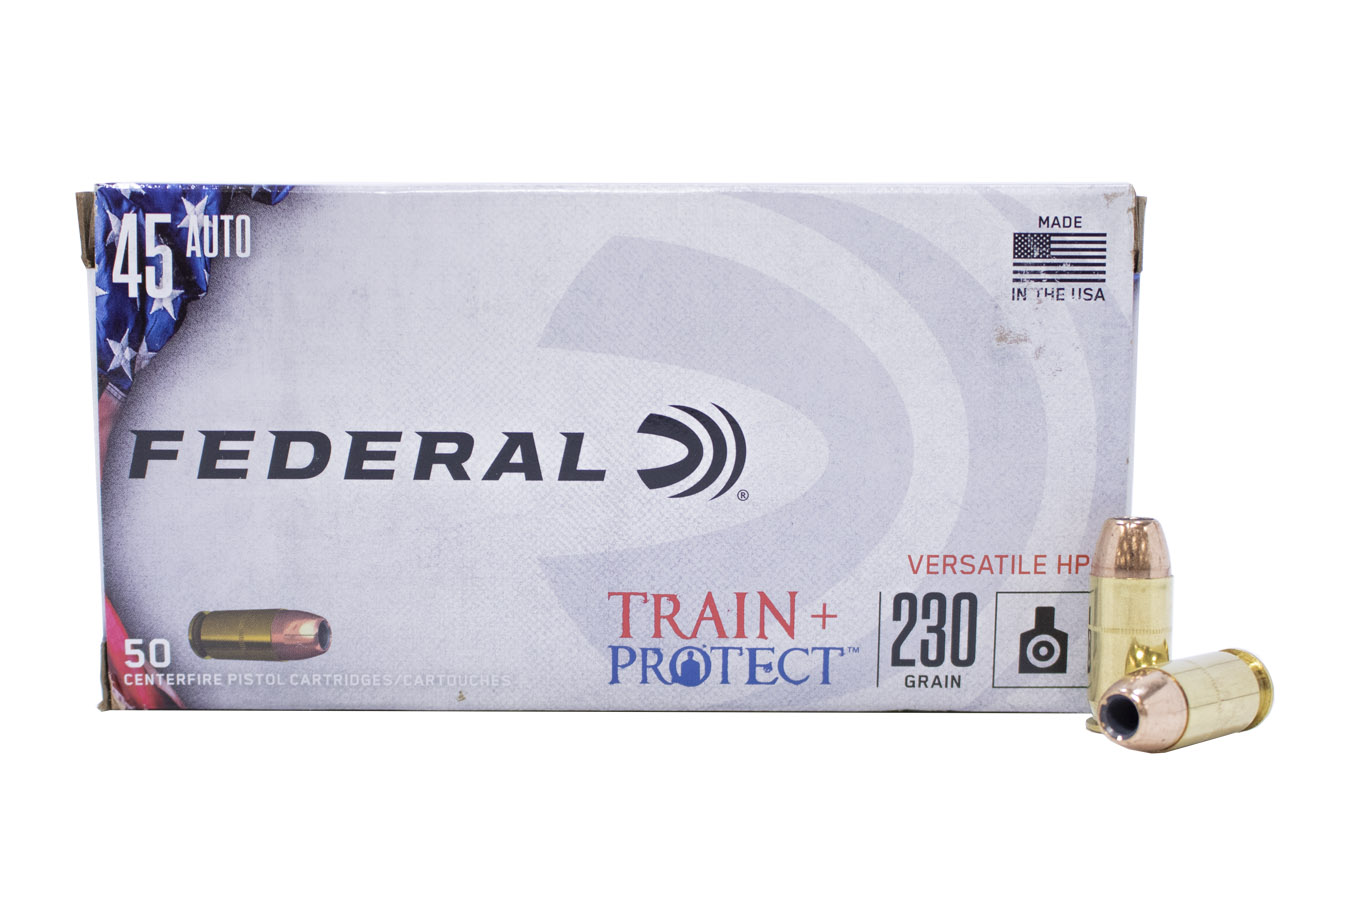 FEDERAL AMMUNITION 45 AUTO 230 GR VHP TRAIN AND PROTECT 50/BOX